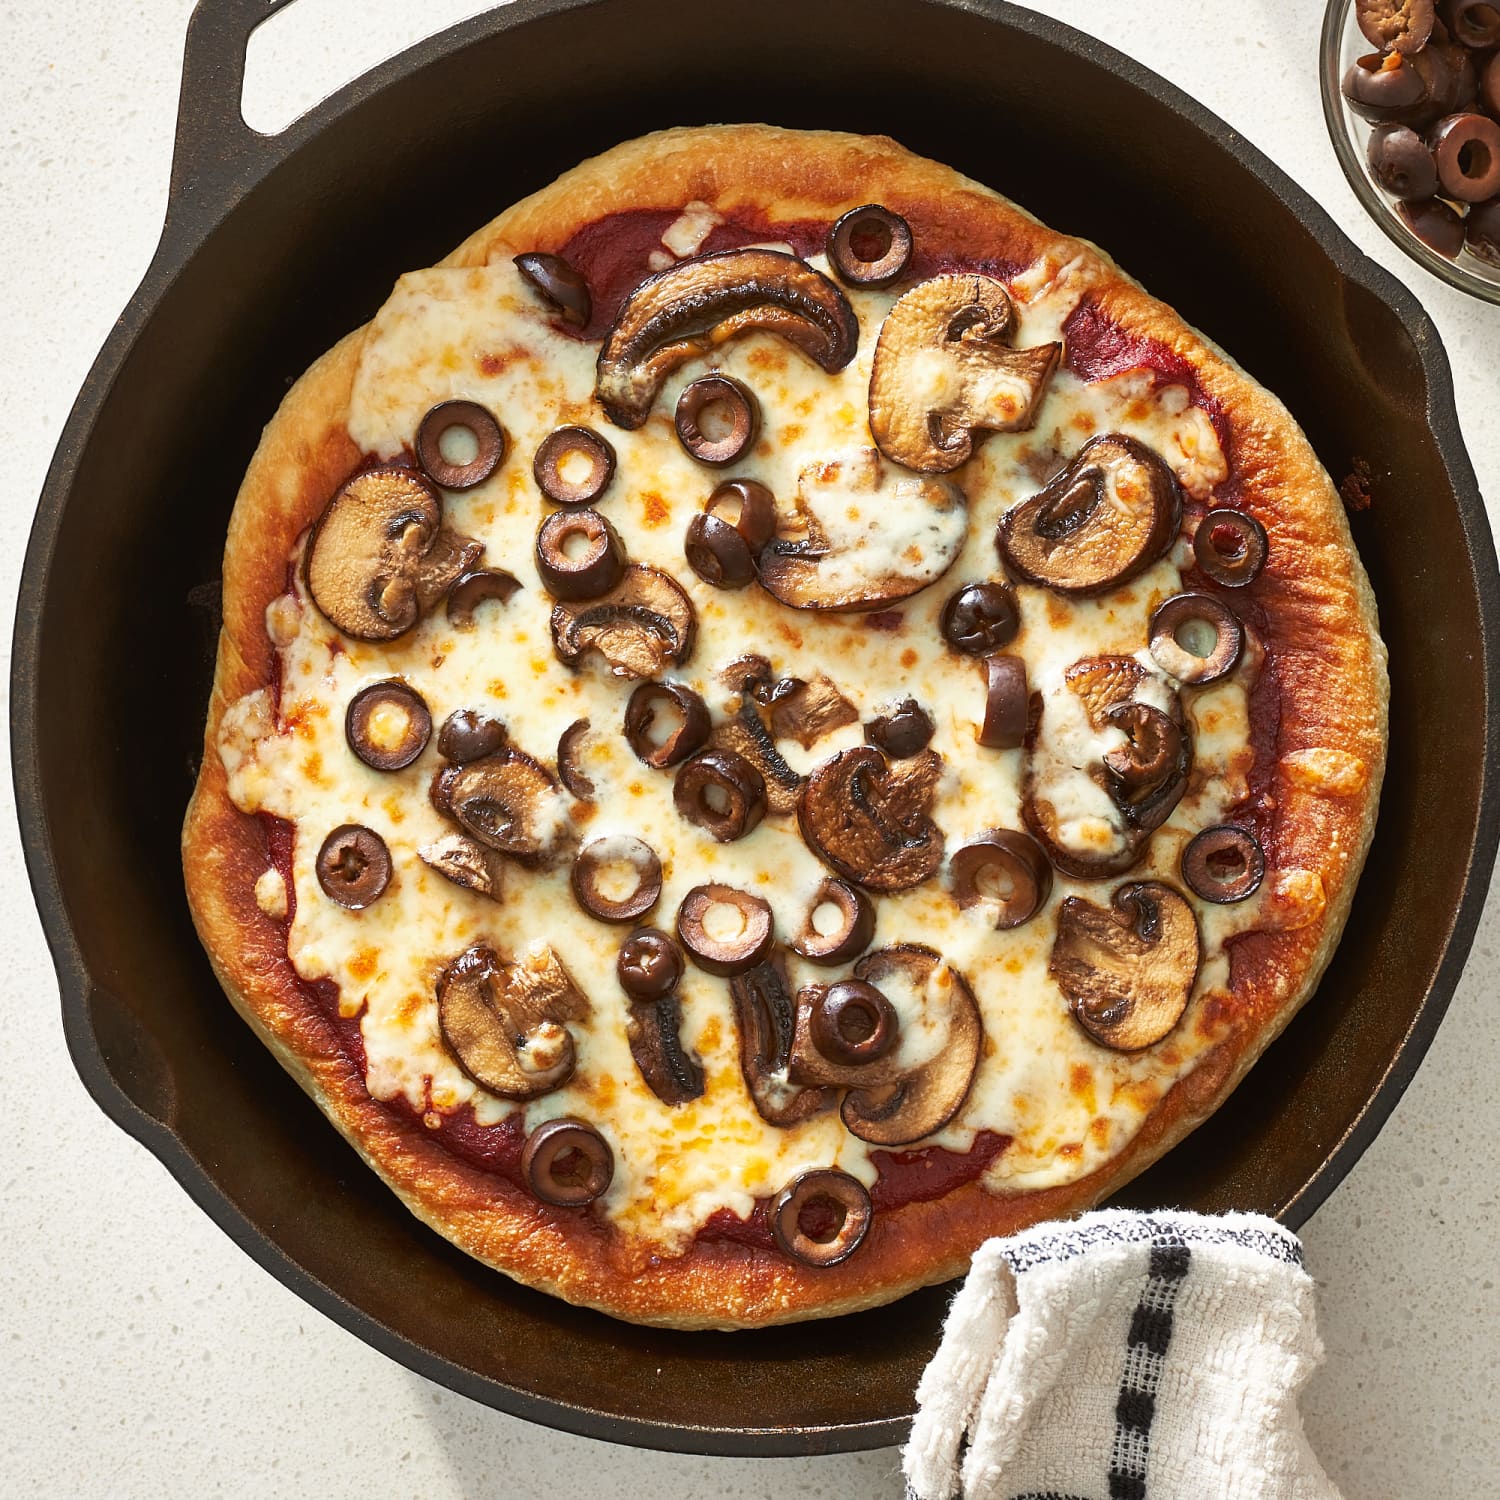 How To Make Stovetop Skillet Pizza